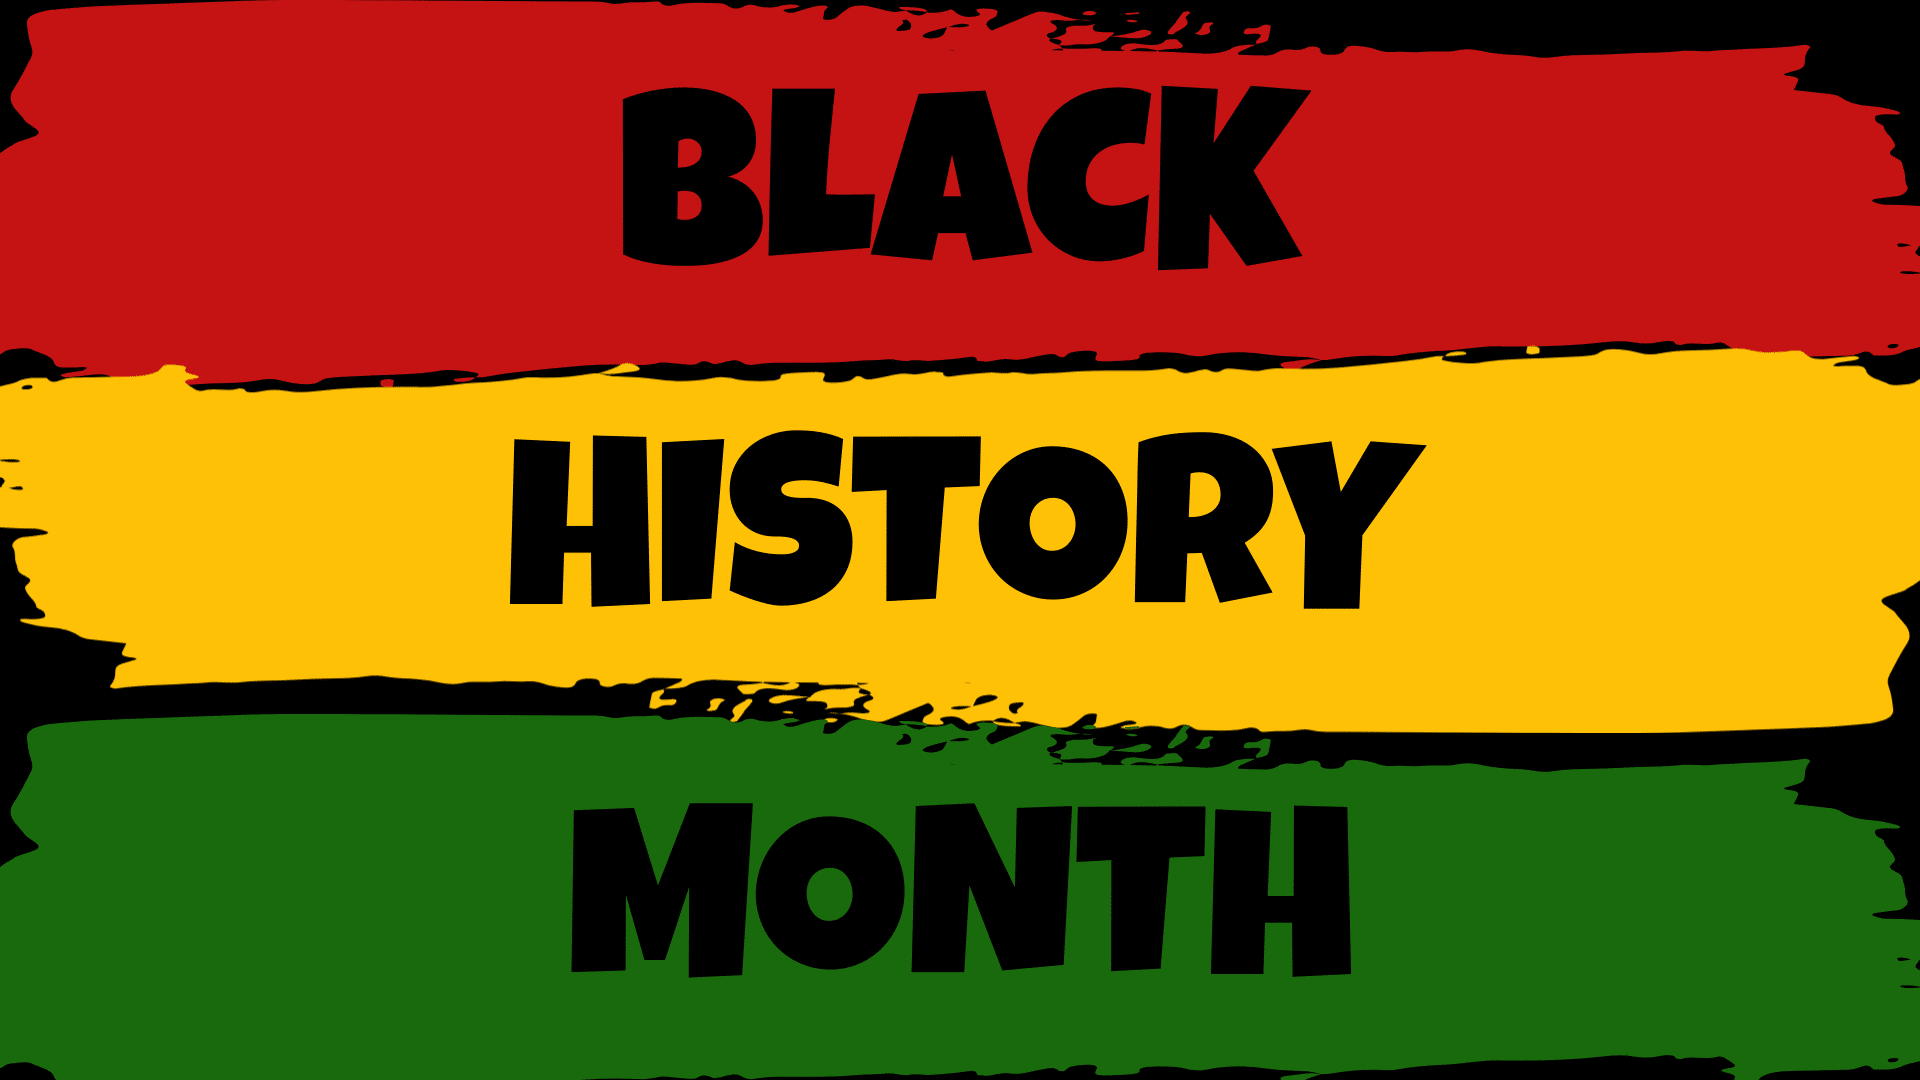 The text Black History Month on a red, yellow and green background